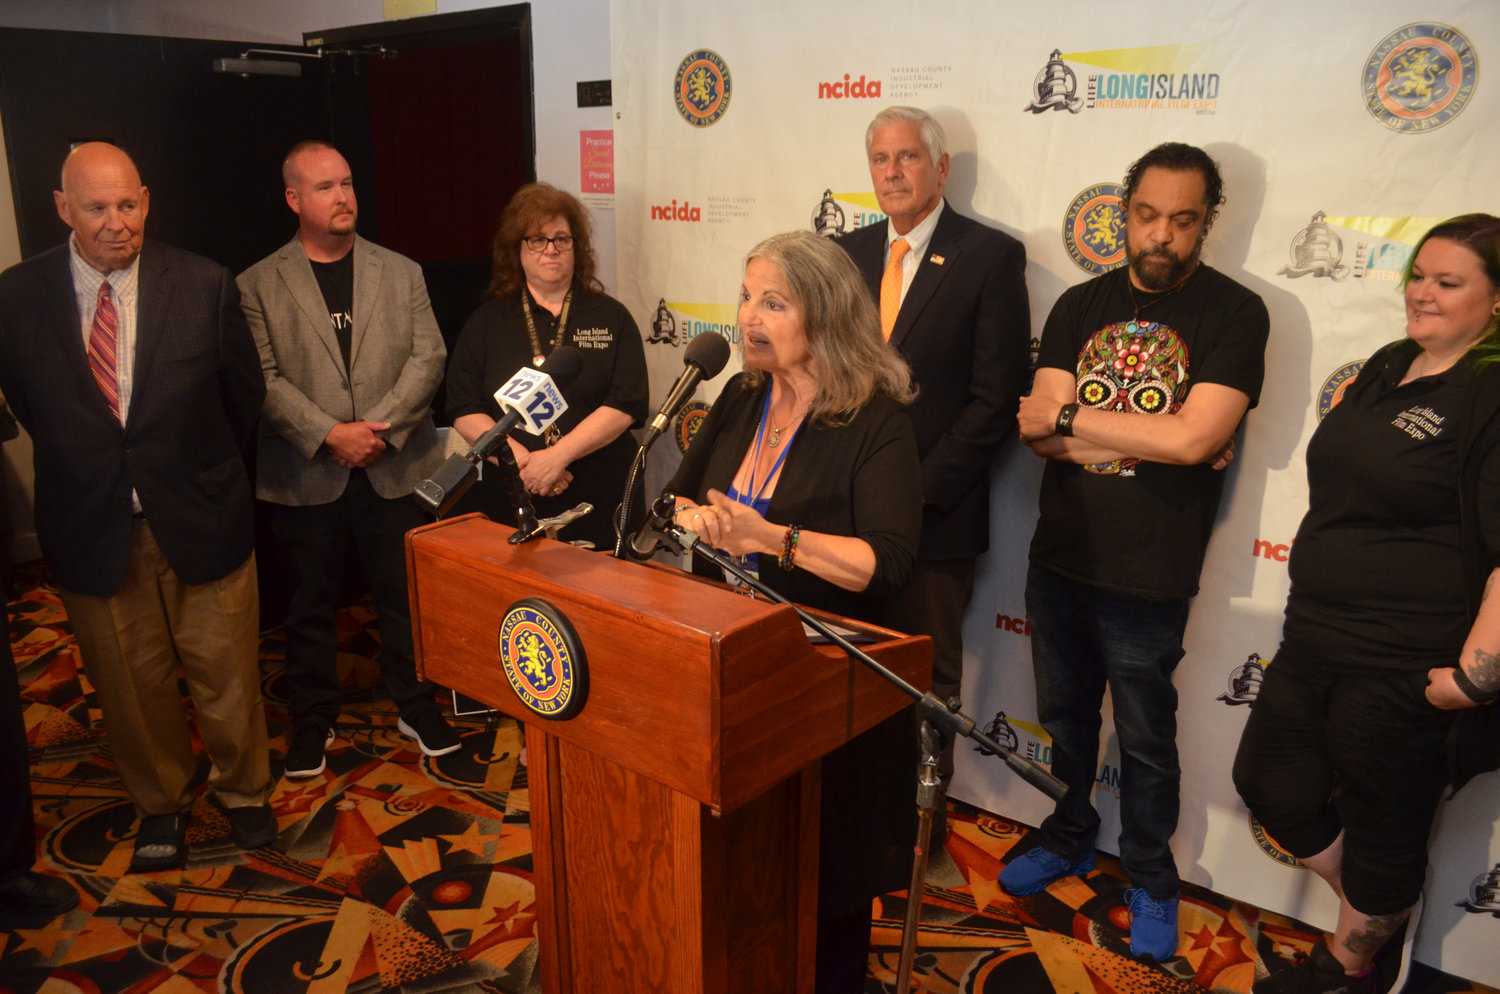 Debra Markowitz, co-creator of the Long Island International Film Expo, said she was thankful for the support the program receives annually from sponsors.